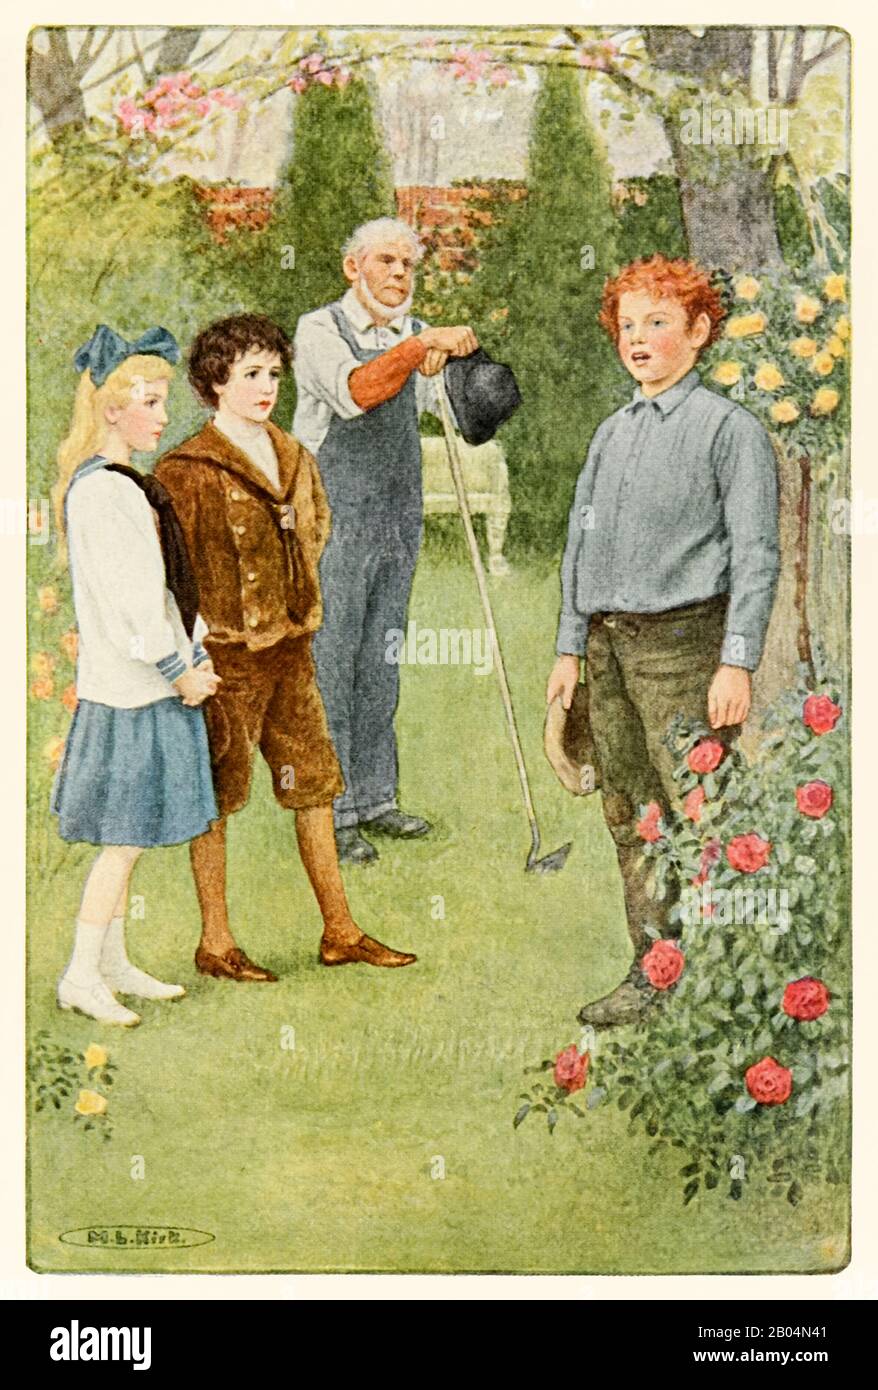 “ ‘Praise God from whom all blessings flow’” from The Secret Garden by Frances Hodgson Burnett (1849-1924). Illustration shows singing to Ben Weatherstaff, Colin and Mary in the Rose garden. Photograph of first American edition published in 1911 with illustrations by Maria Louise Kirk (1860-1938). Stock Photo